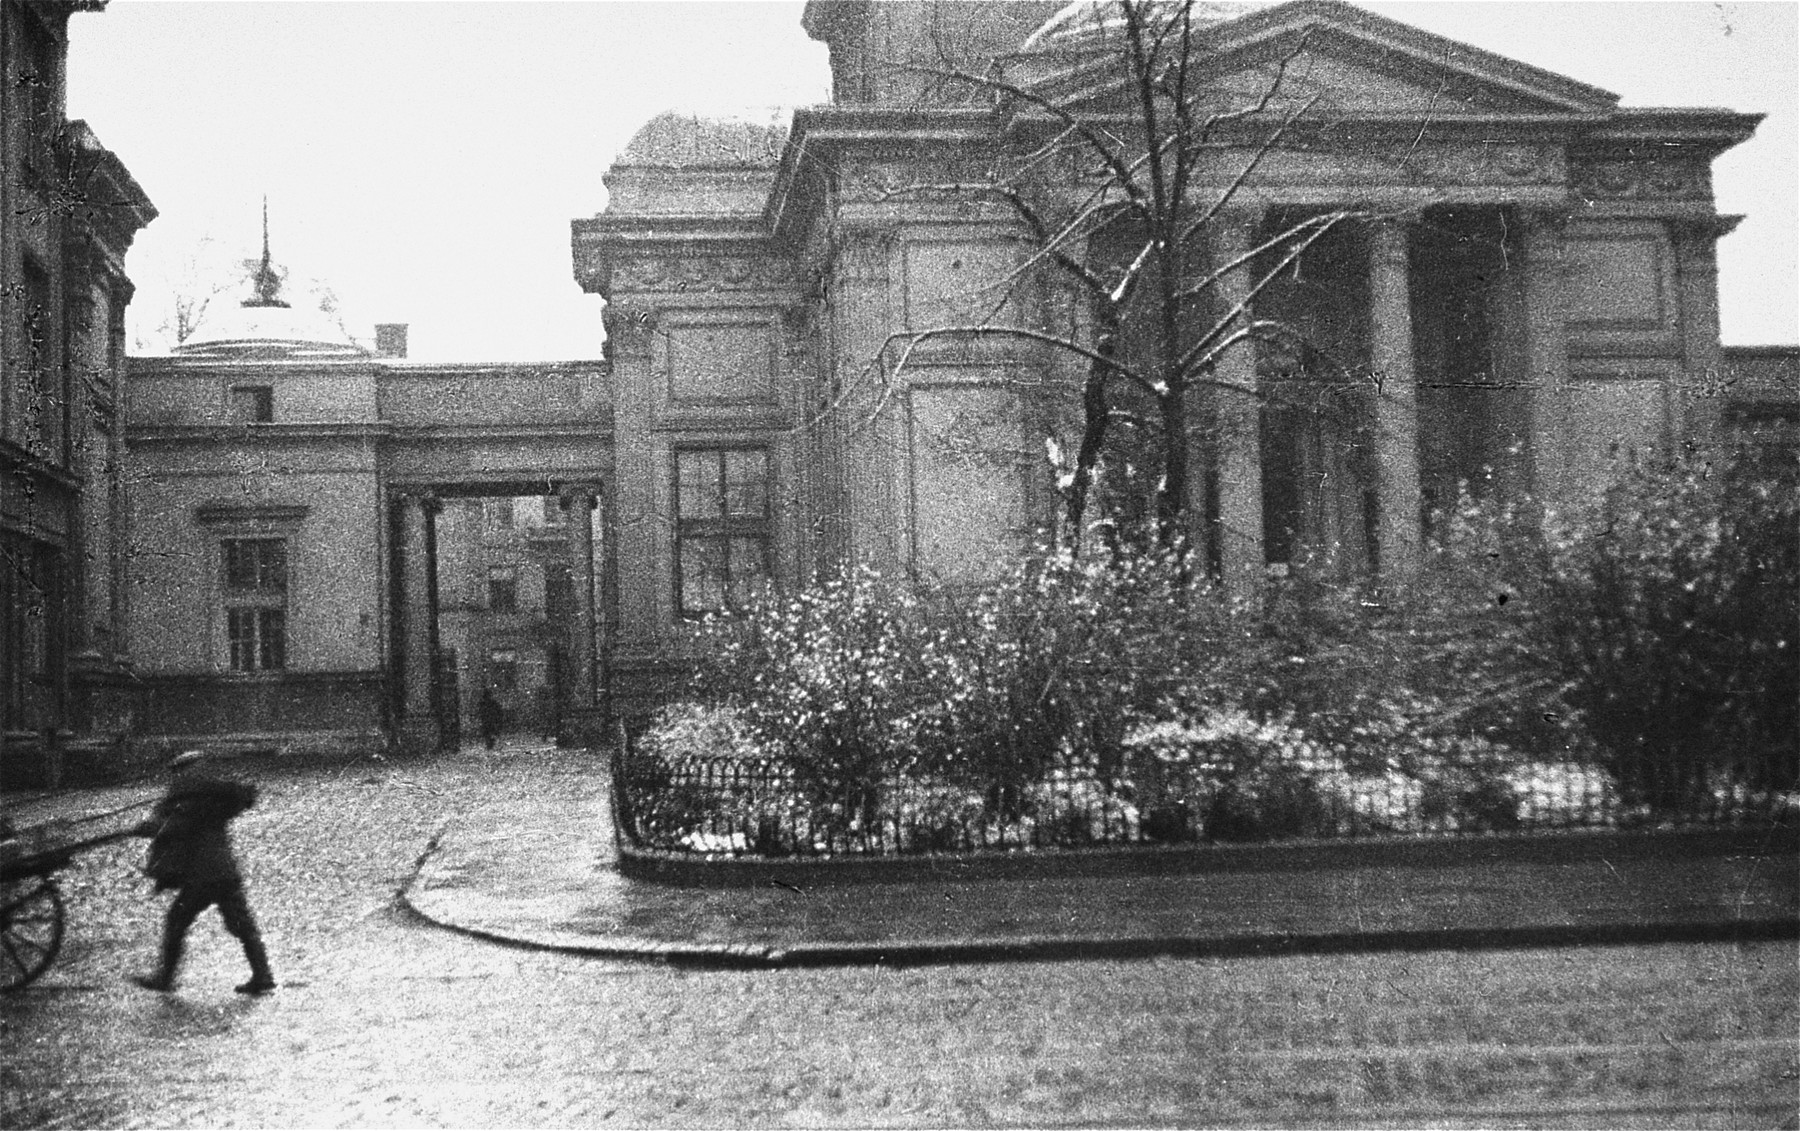 View of the Great Synagogue on Tlomackie Street in Warsaw, destroyed by the Germans in May 1943. 

The photographer took this picture in March 1943, just before the Warsaw ghetto uprising.